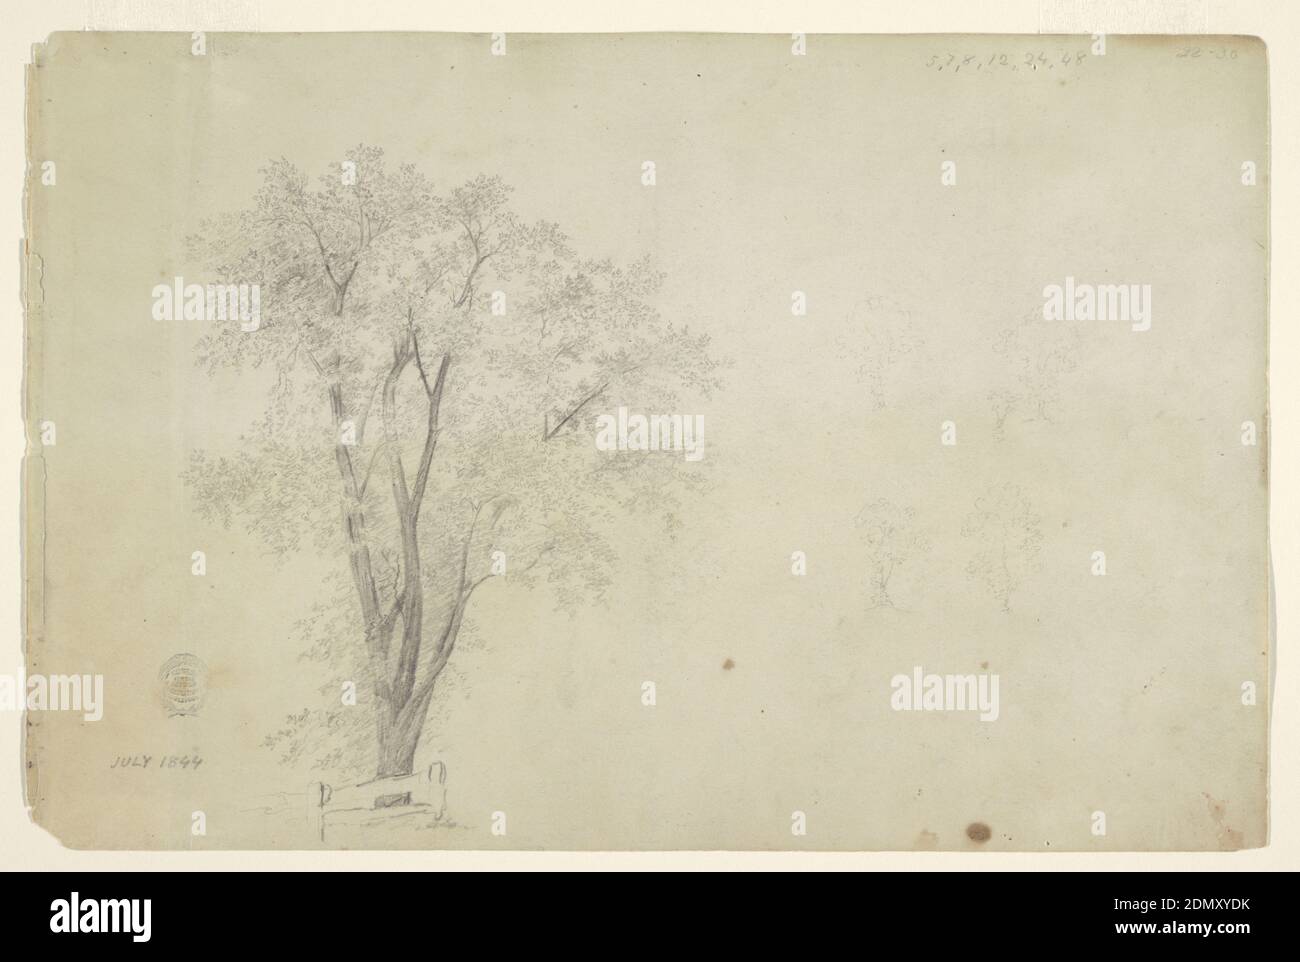 Trees, Frederic Edwin Church, American, 1826–1900, Black crayon on paper, Horizontal view of a maple tree behind a fence at left and four very slight sketches of trees at right., USA, July 1844, nature studies, Drawing Stock Photo